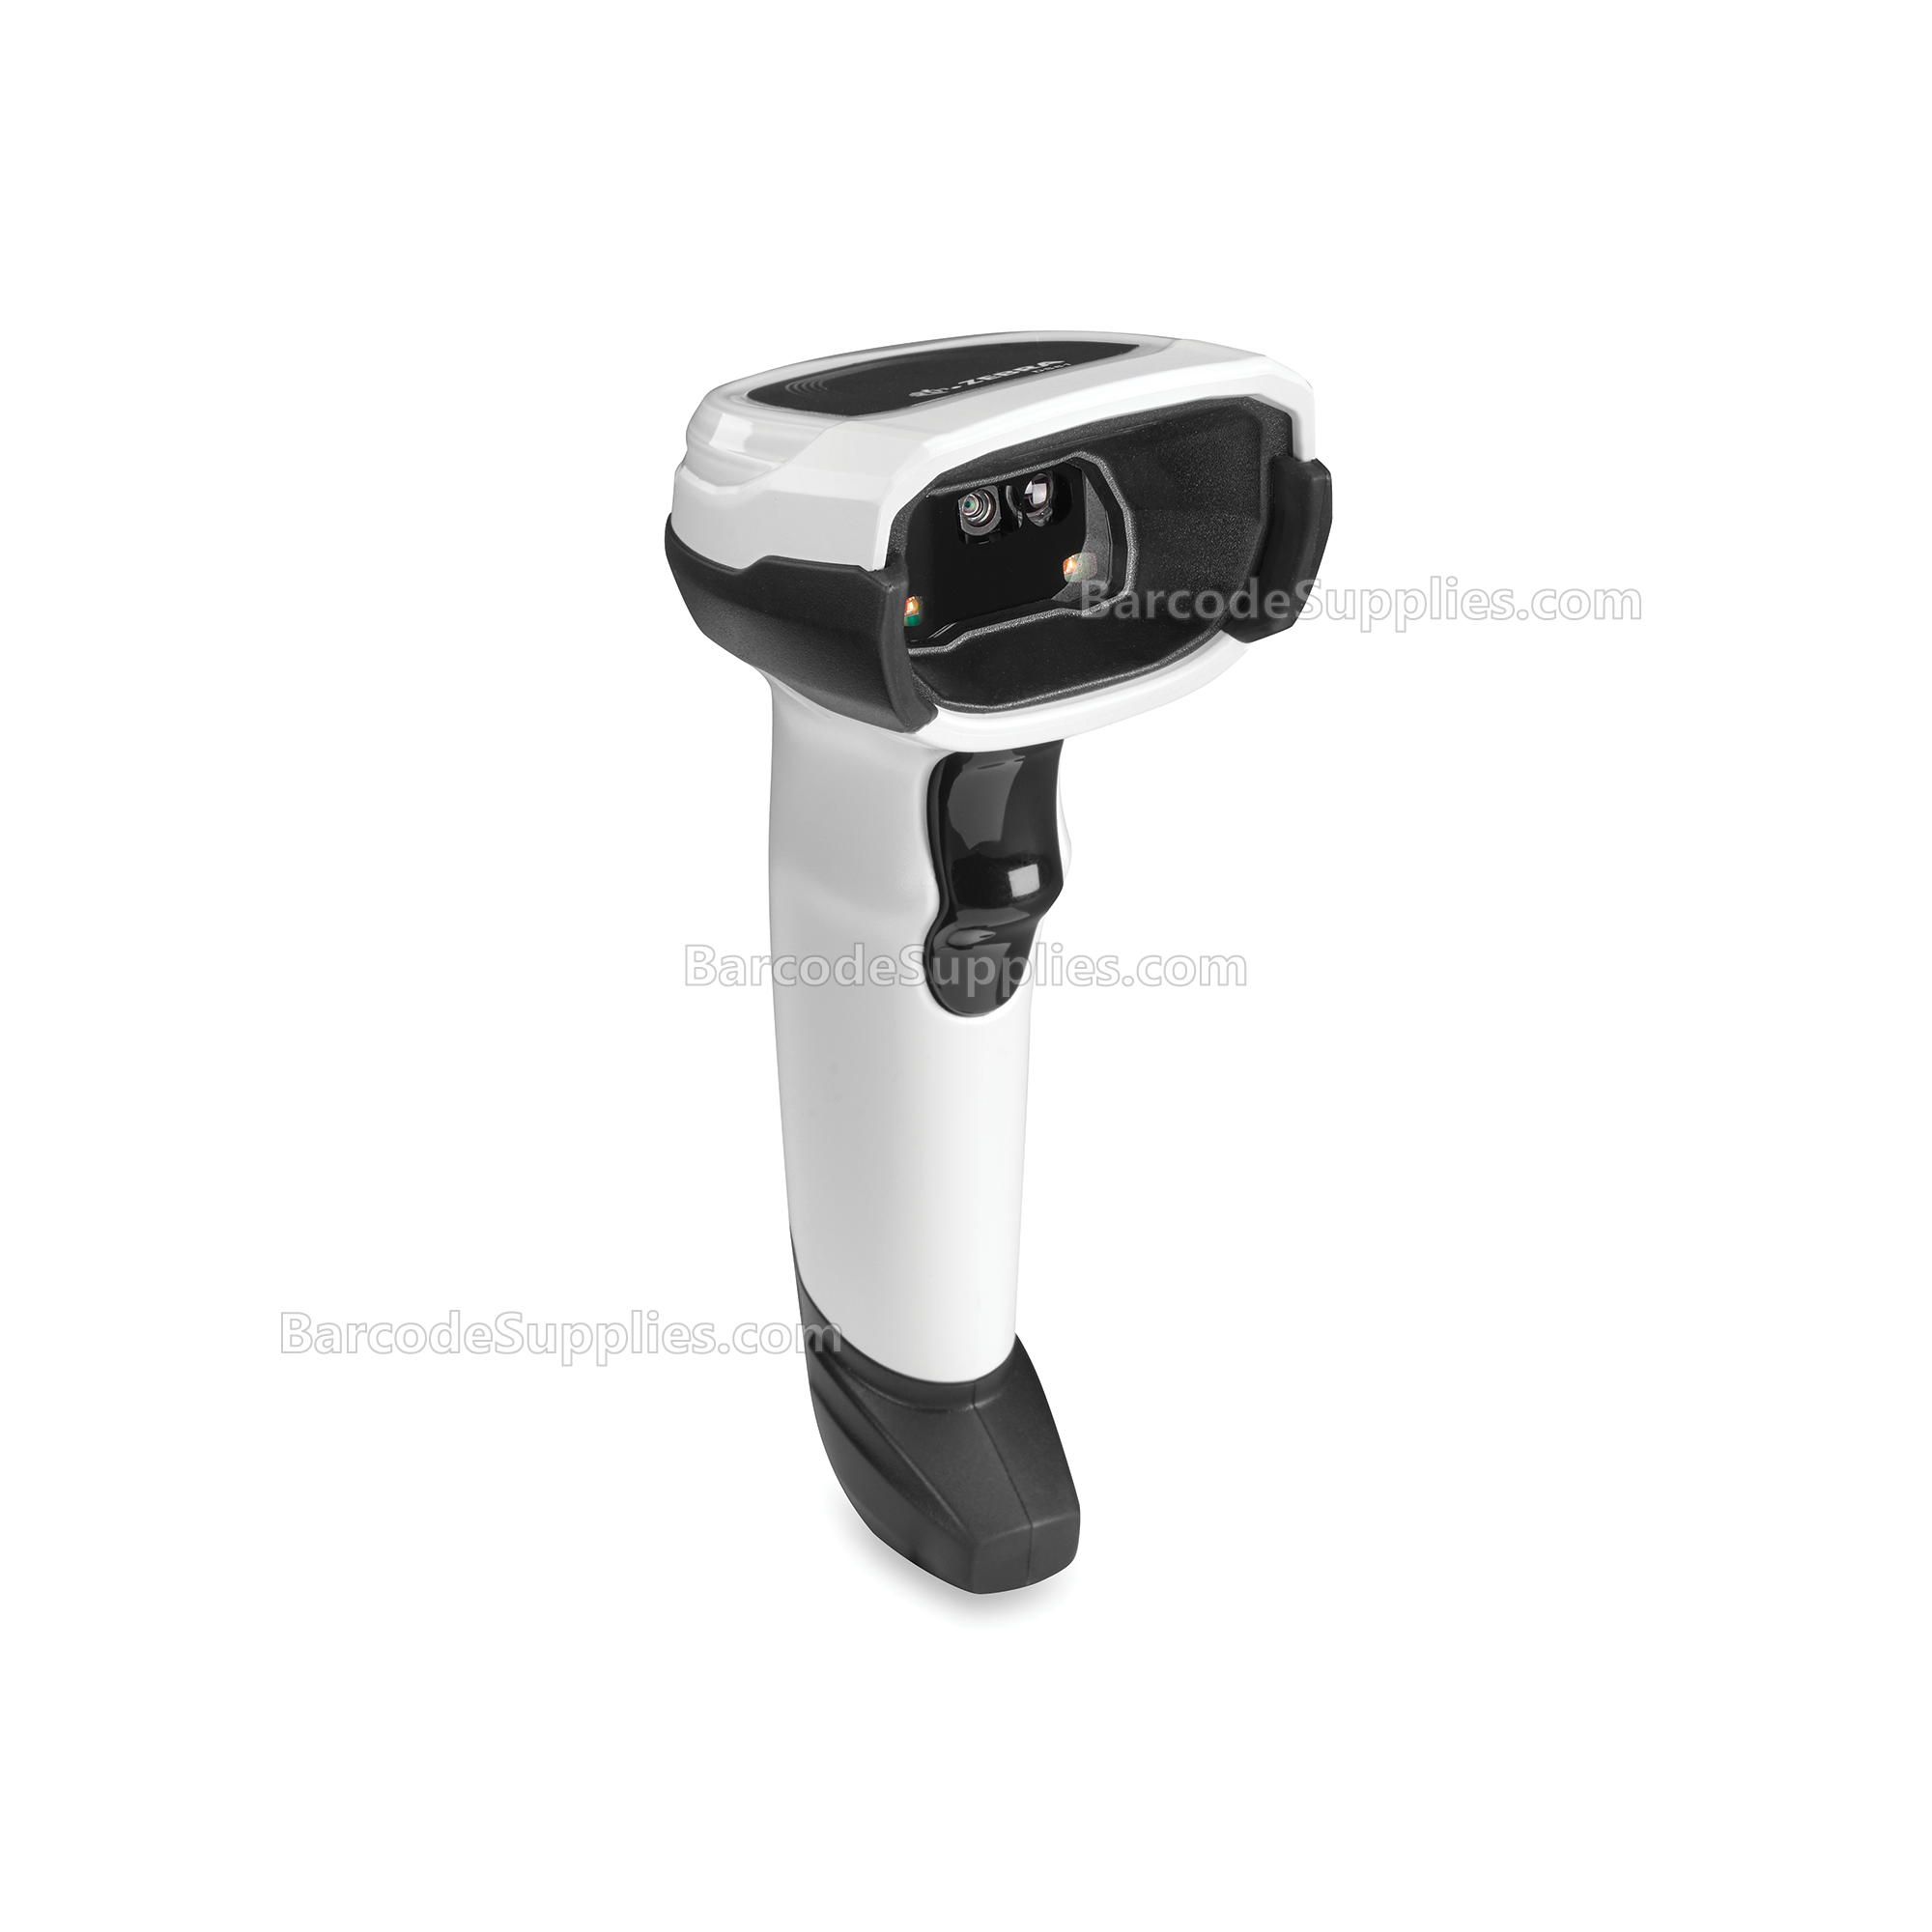 DS8108-SR White (with Stand) USB KIT: DS8108-SR00006ZZWW Scanner, CBA-U21-S07ZBR Shielded USB Cable, 20-71043-04R Stand